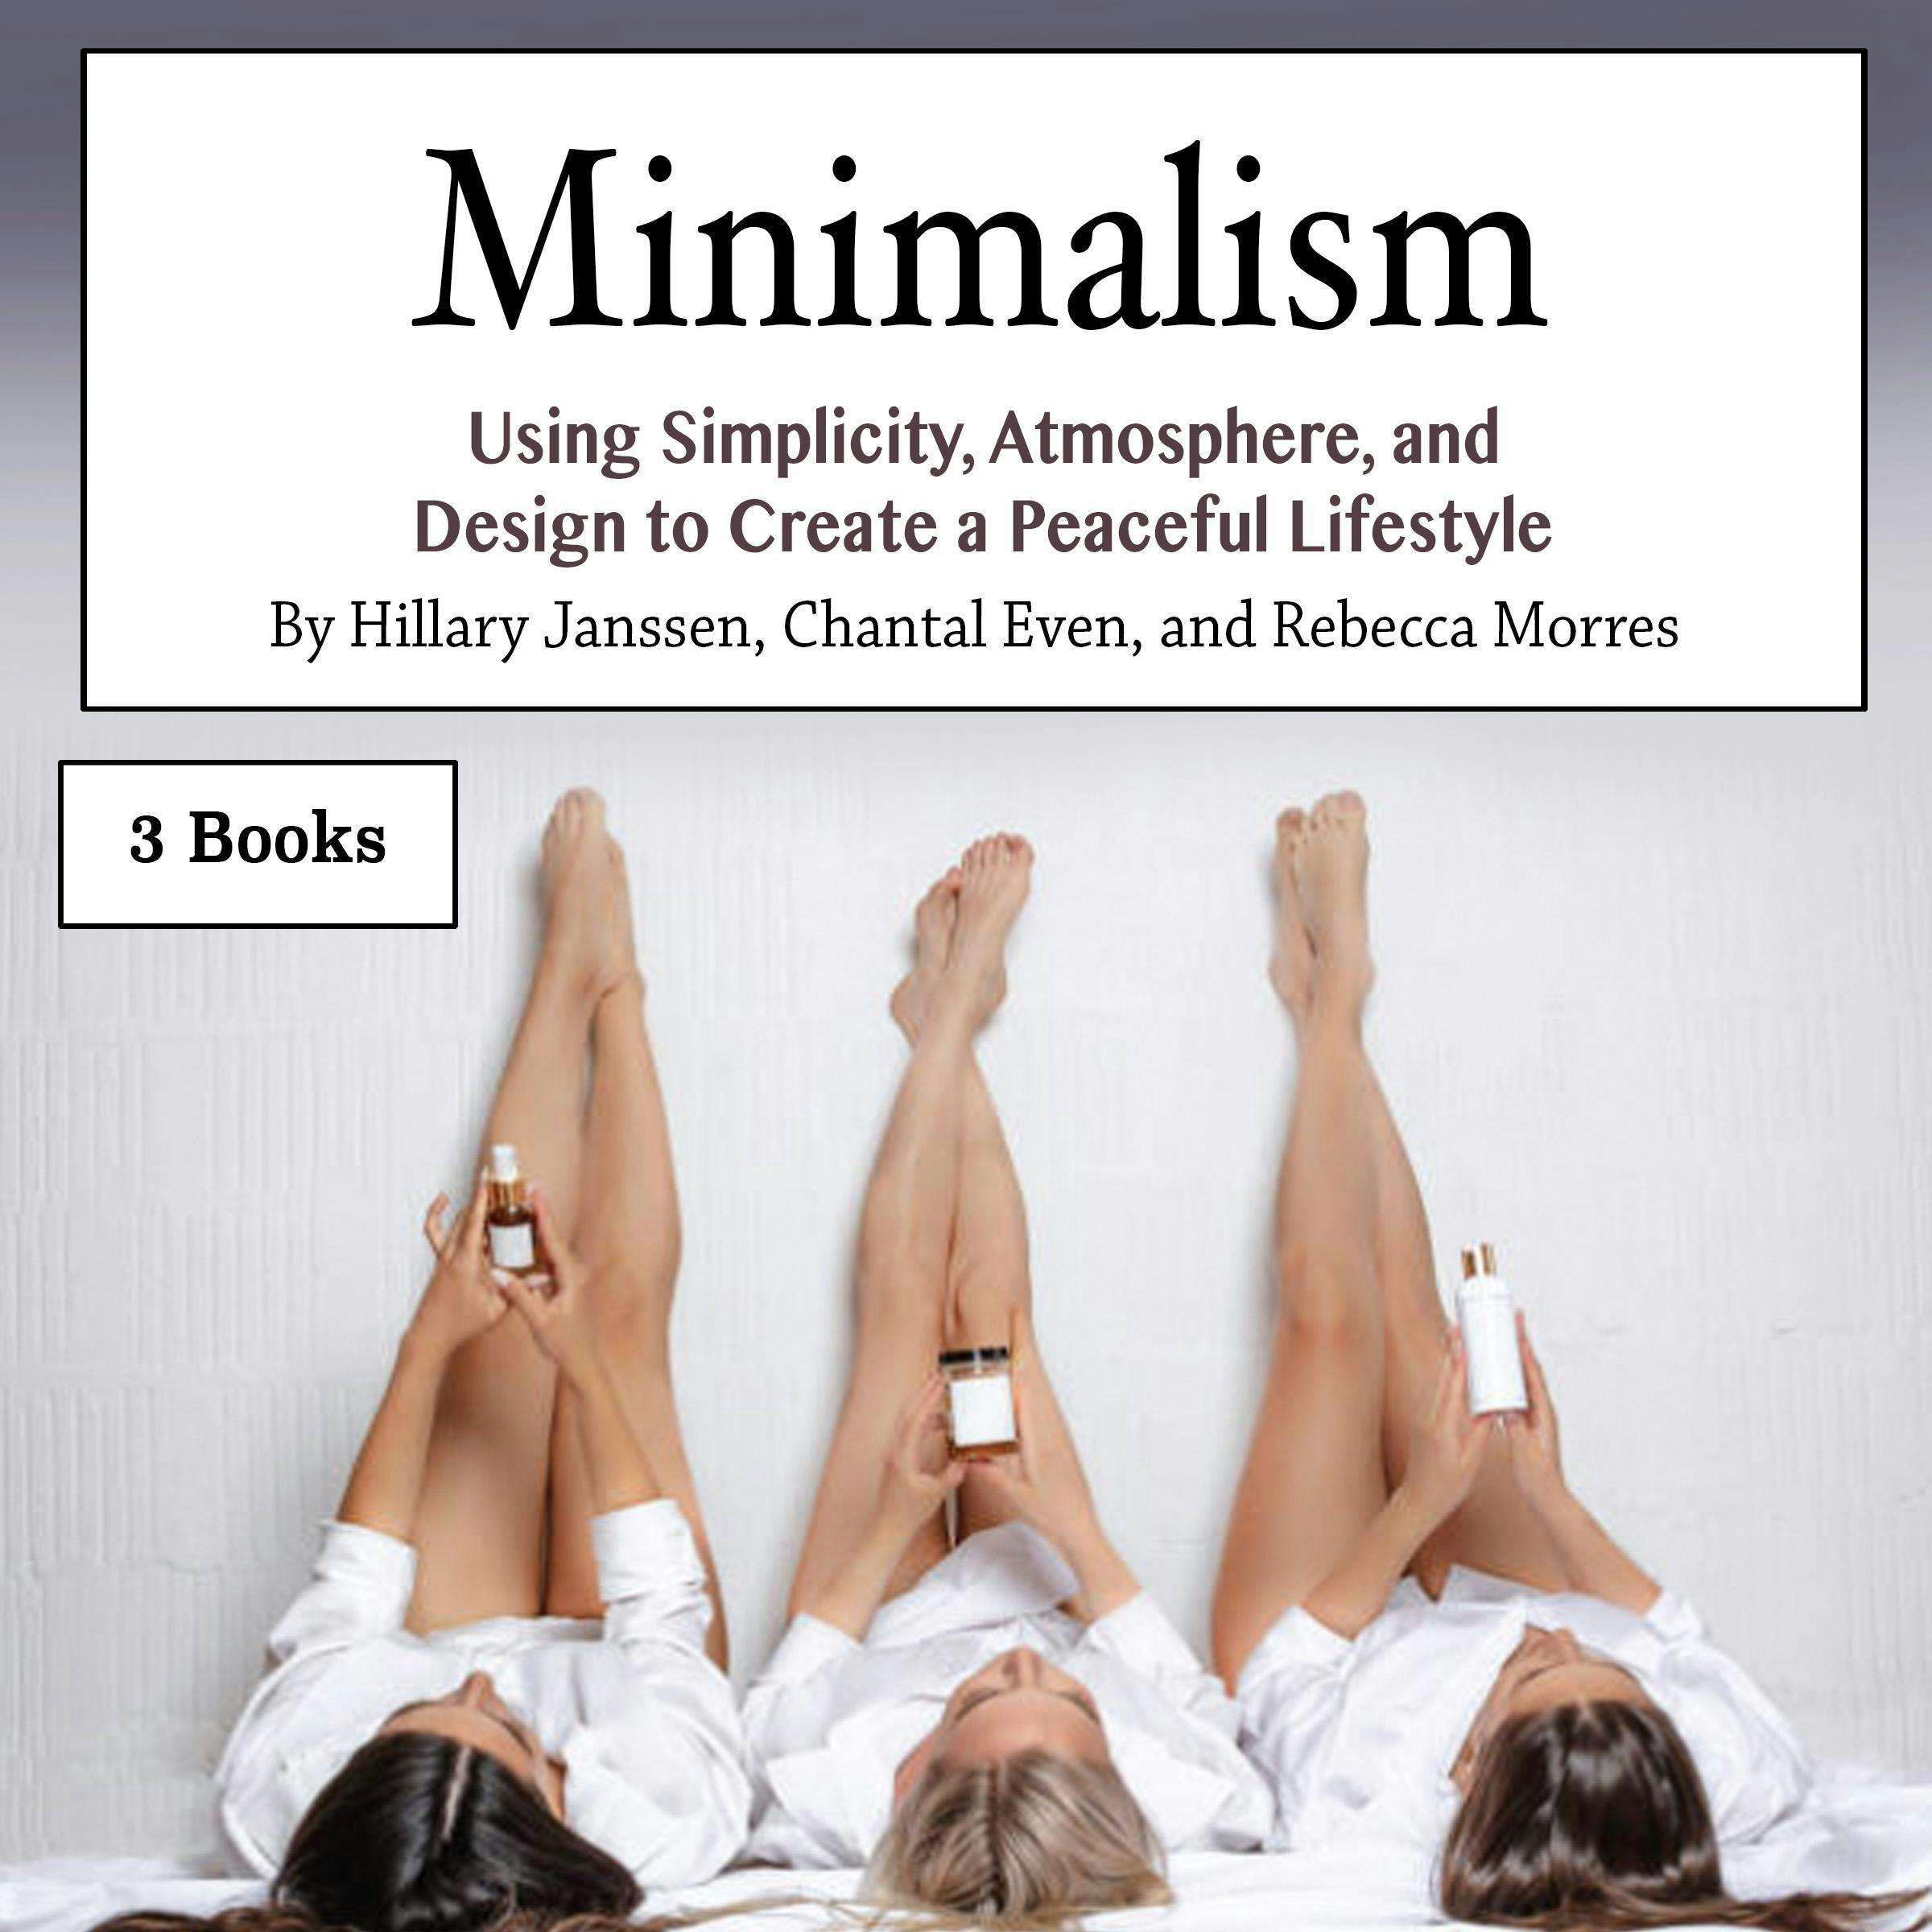 Minimalism: Using Simplicity, Atmosphere, and Design to Create a Peaceful Lifestyle - Rebecca Morres, Hillary Janssen, Chantal Even